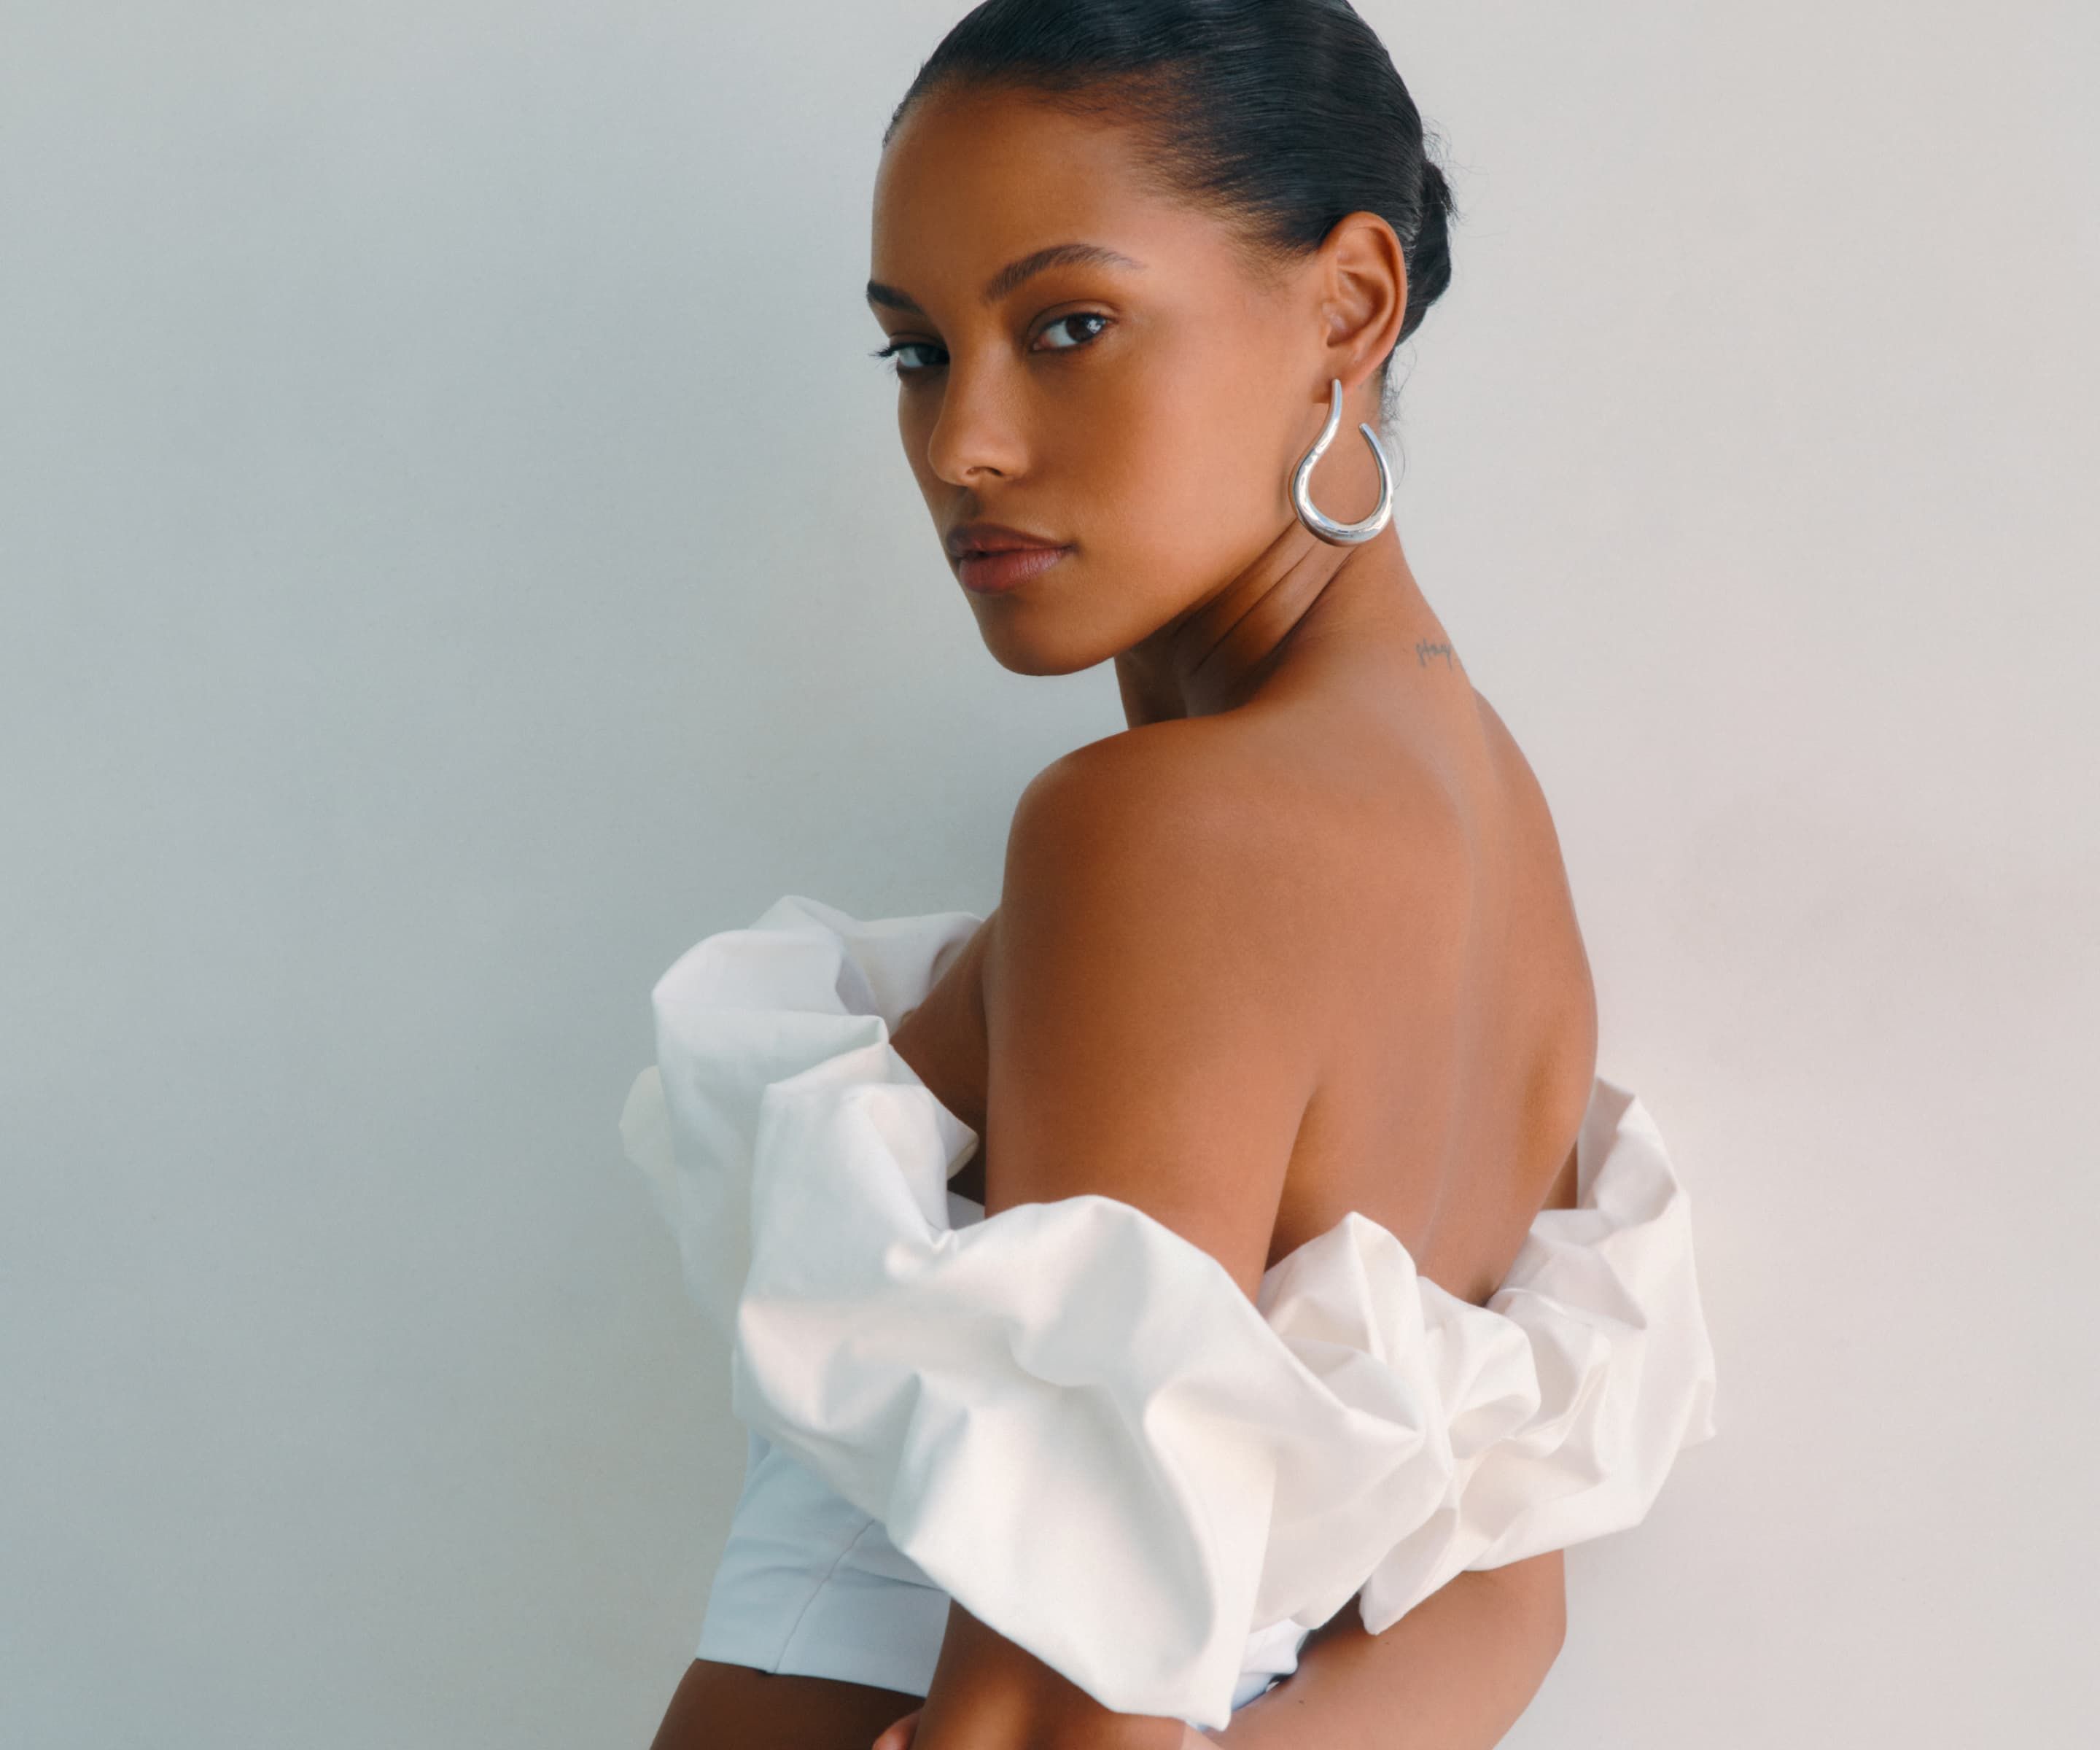 A model wears a white off-the-shoulder ruffled top.